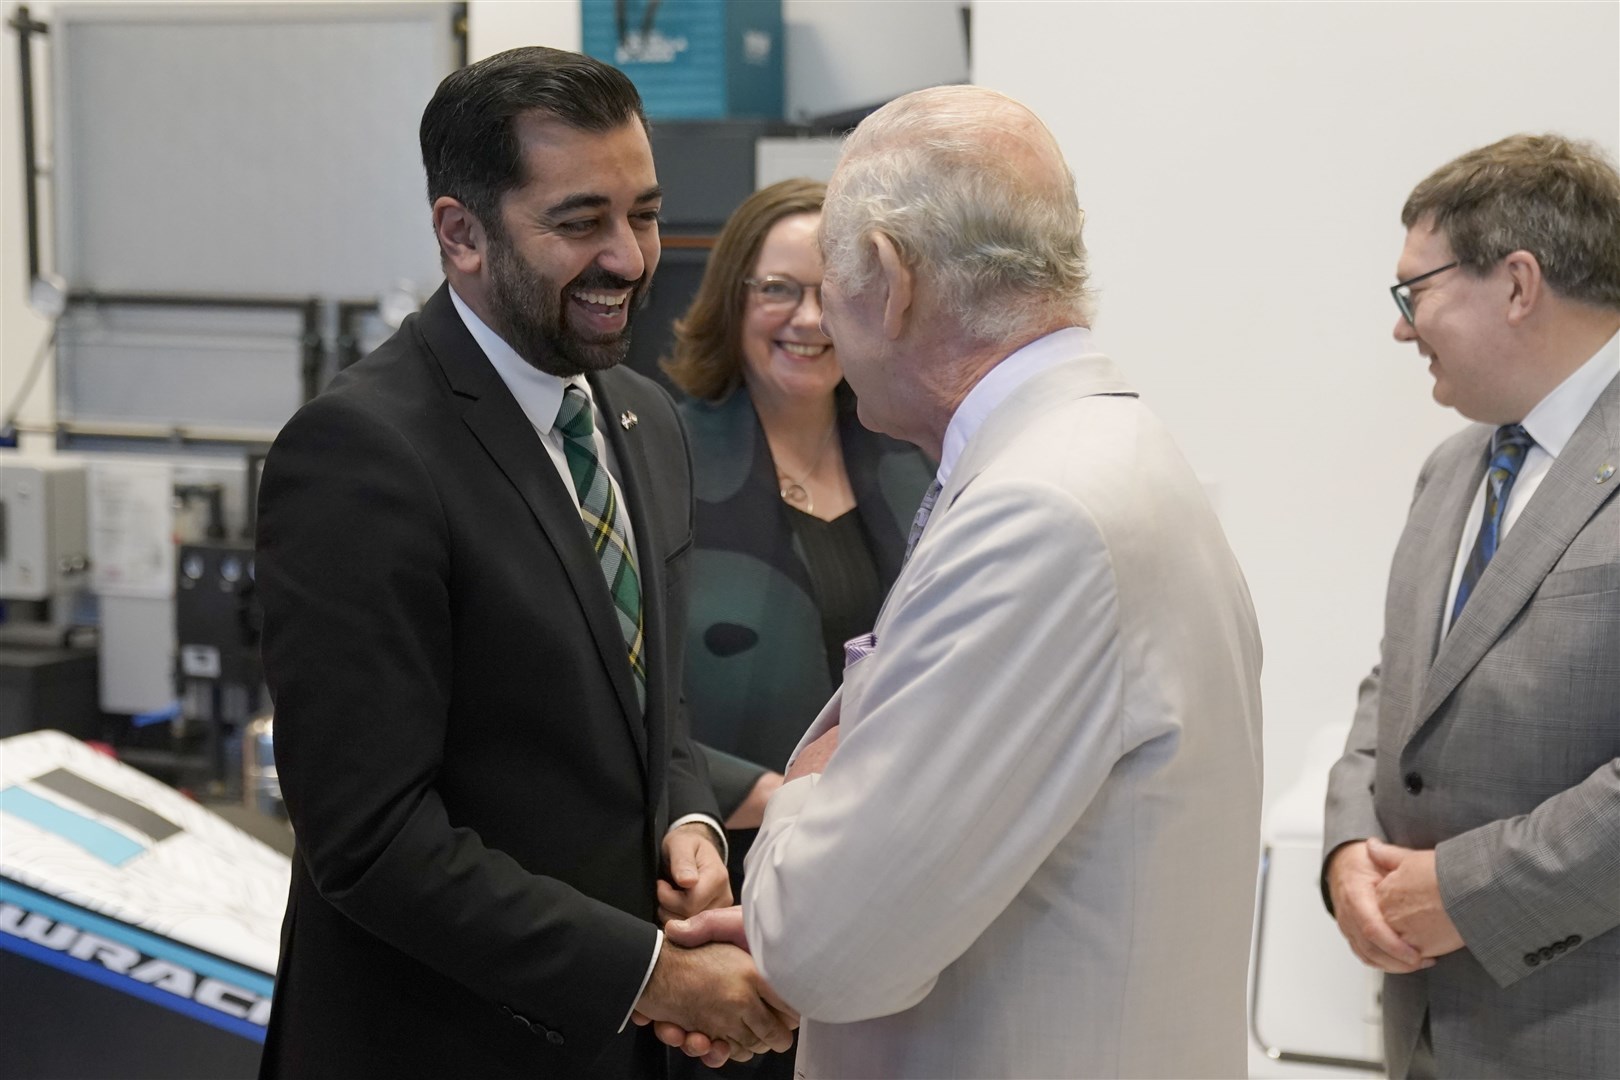 Charles met Scottish First Minister Humza Yousaf at the campus (Andrew Matthews/PA)